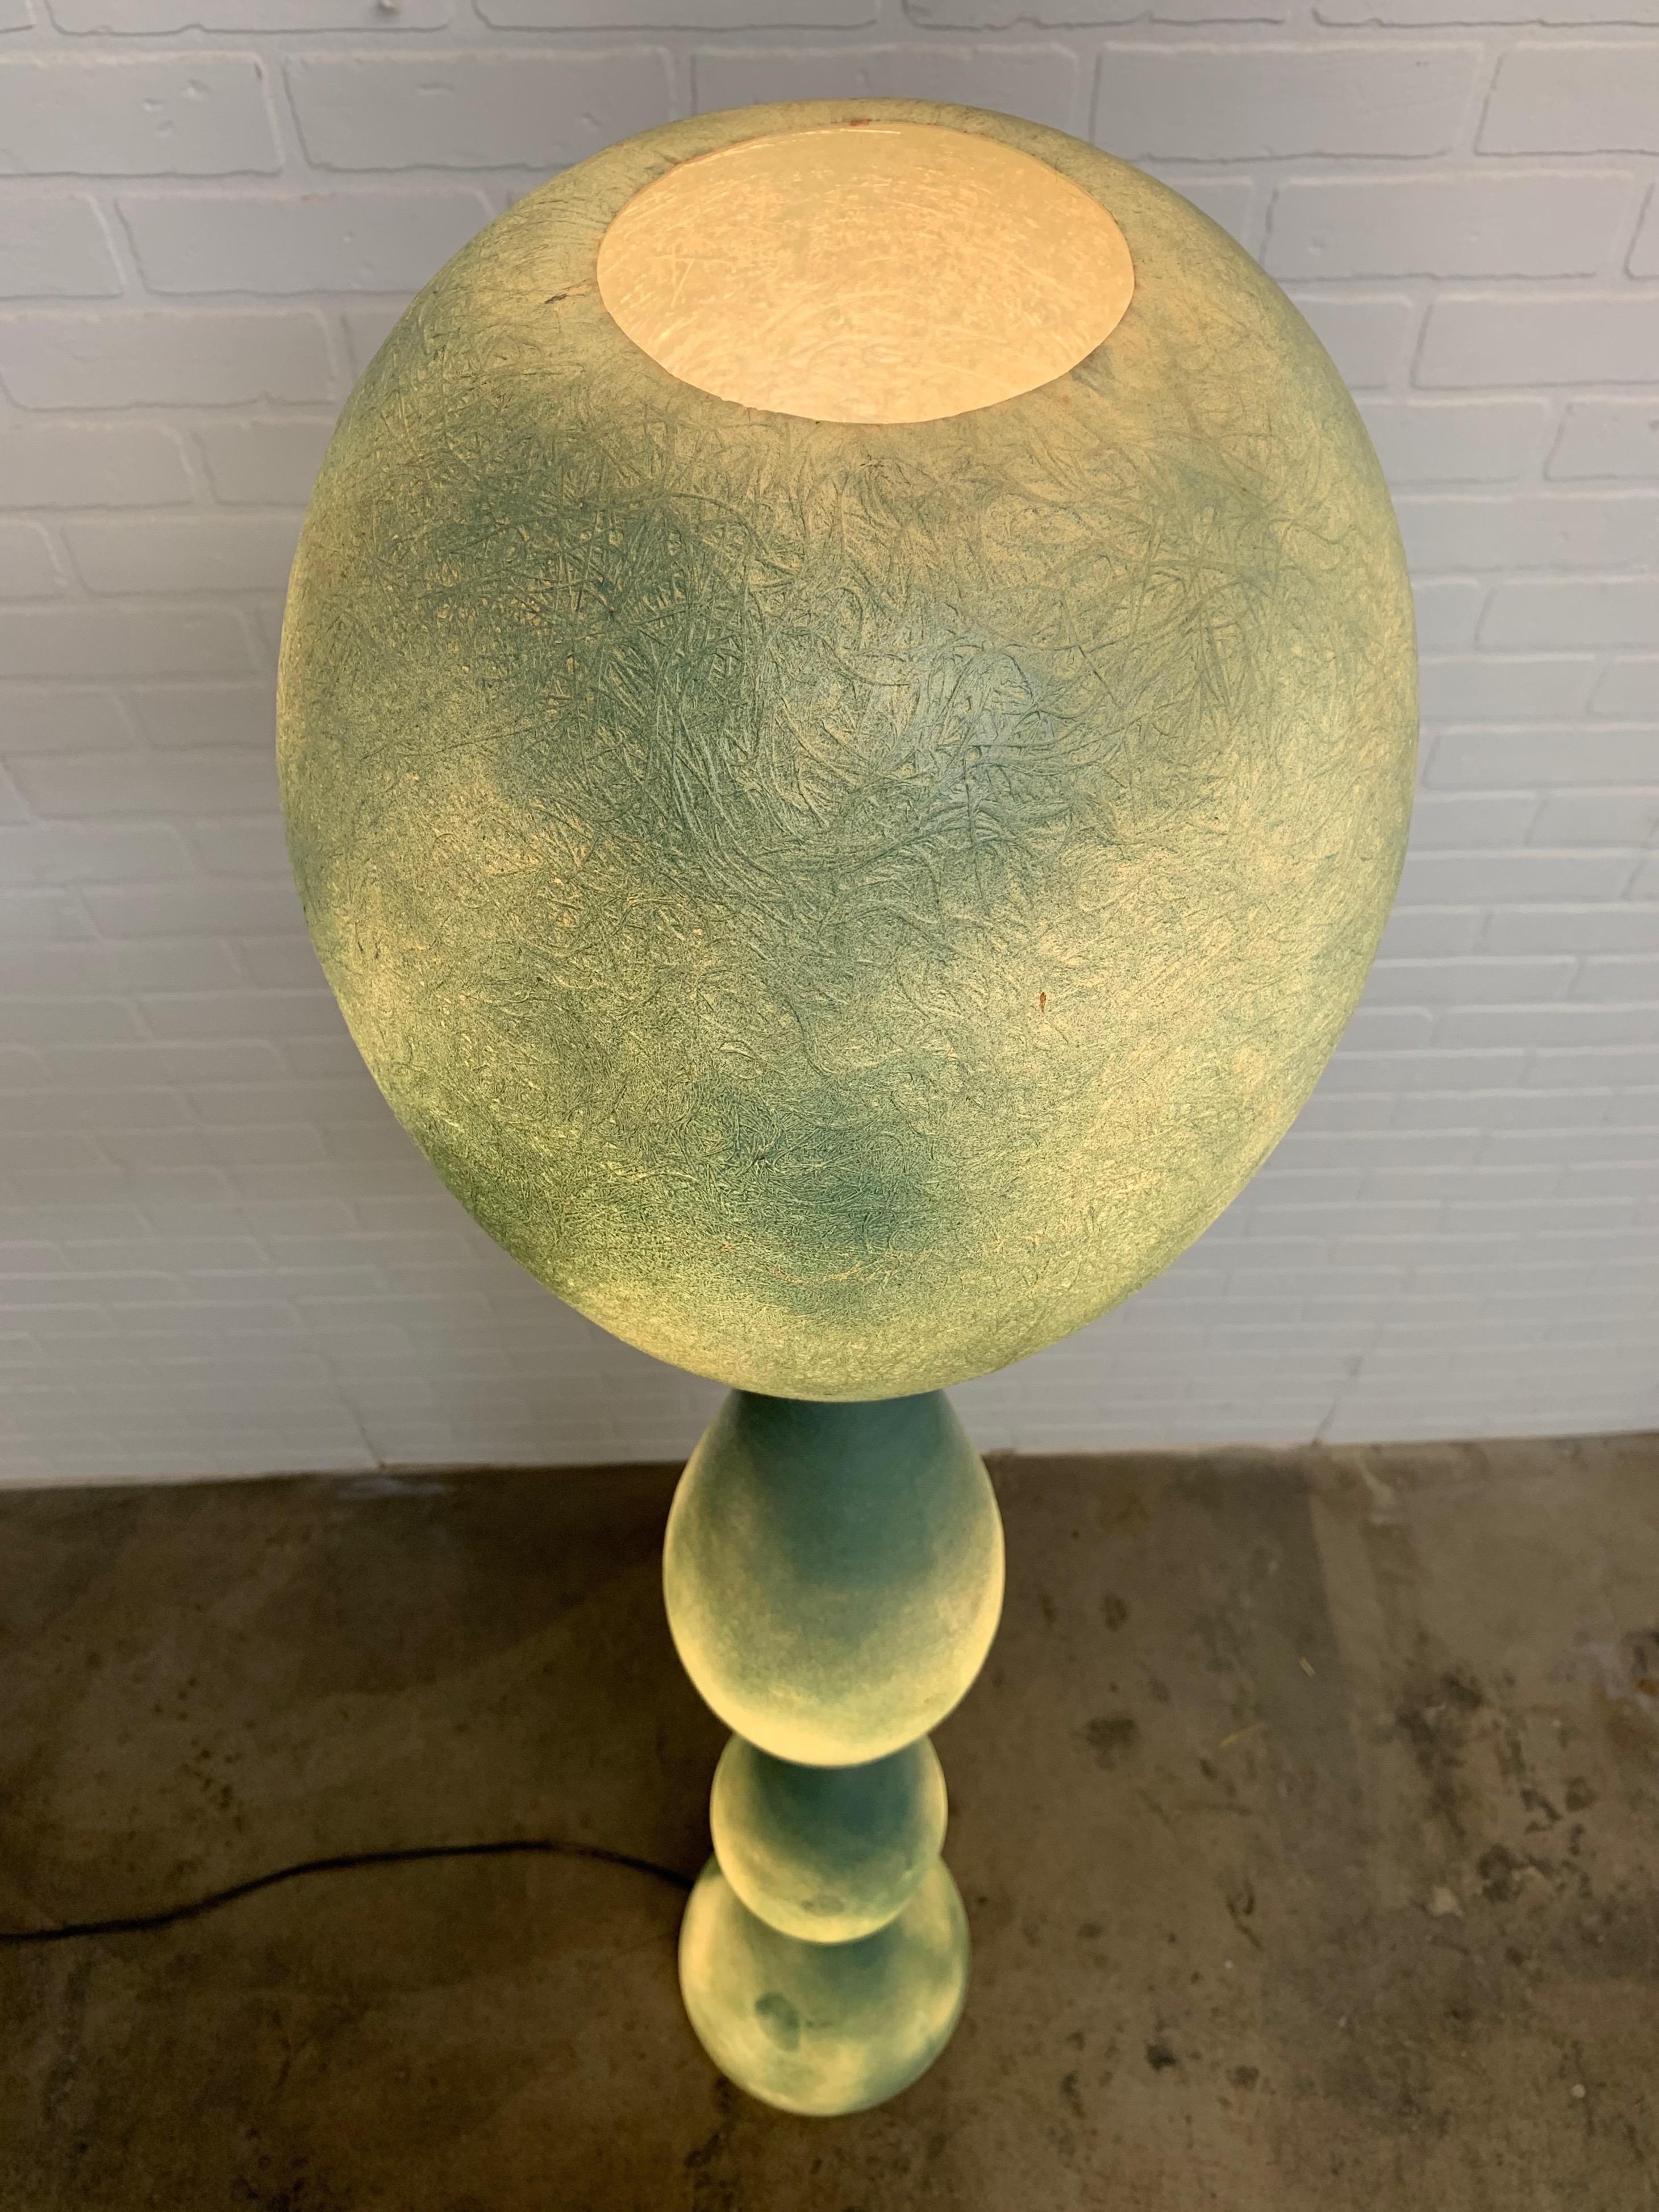 Illuminated green sage sculpted fiberglass floor lamp by Guglielmo Berchicci for Kundalini
These were originally purchased for a prop house in Los Angeles. Seen in many Hollywood productions.
   